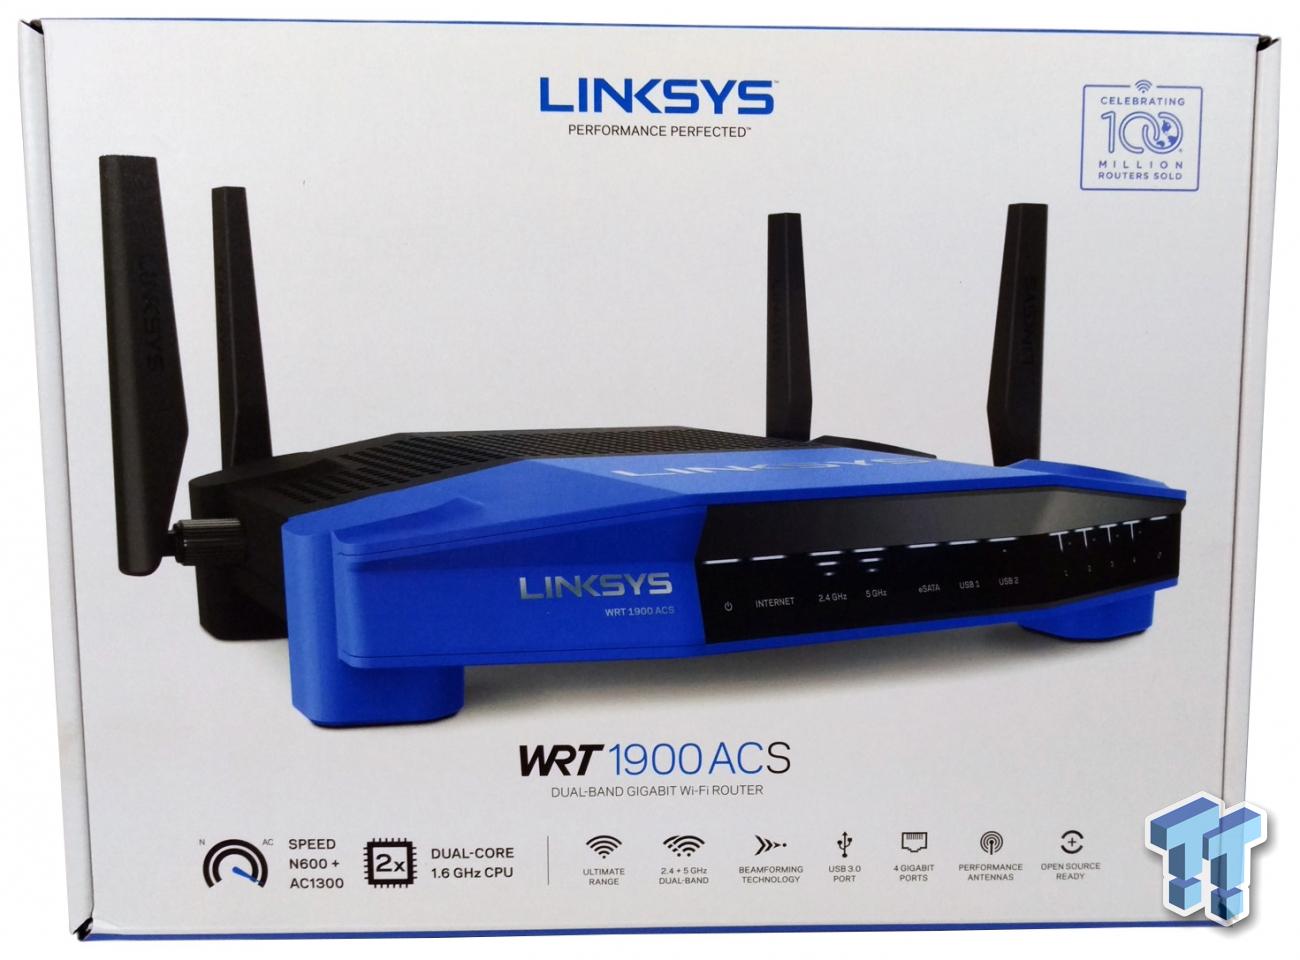 Linksys WRT1900ACS Dual-Band Wireless Router Review